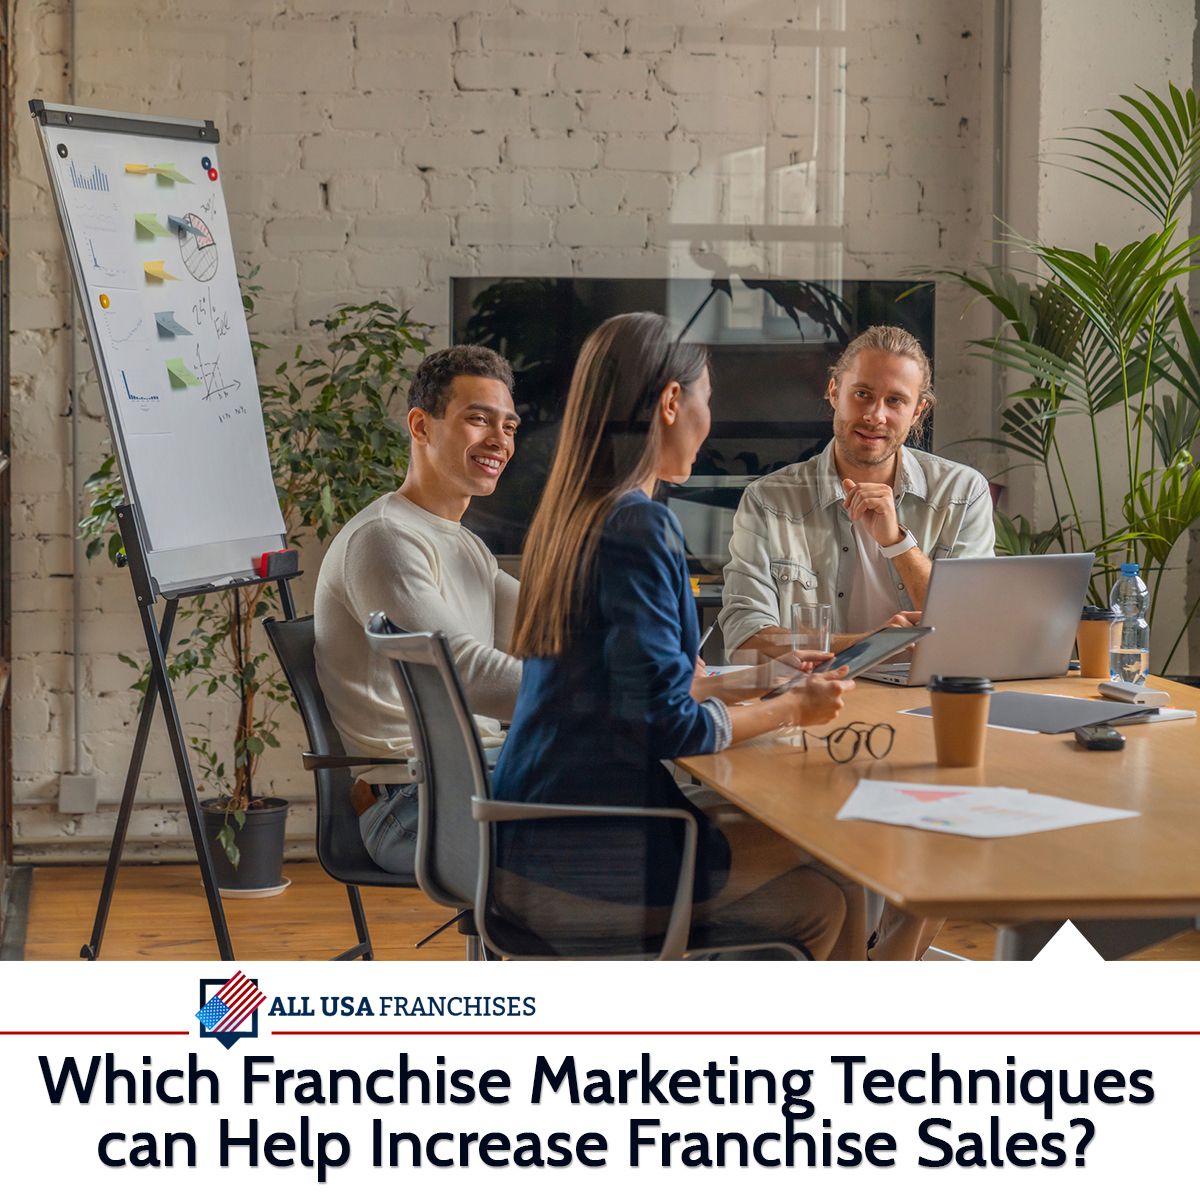 Which Franchise Marketing Techniques can Help Increase Franchise Sales?